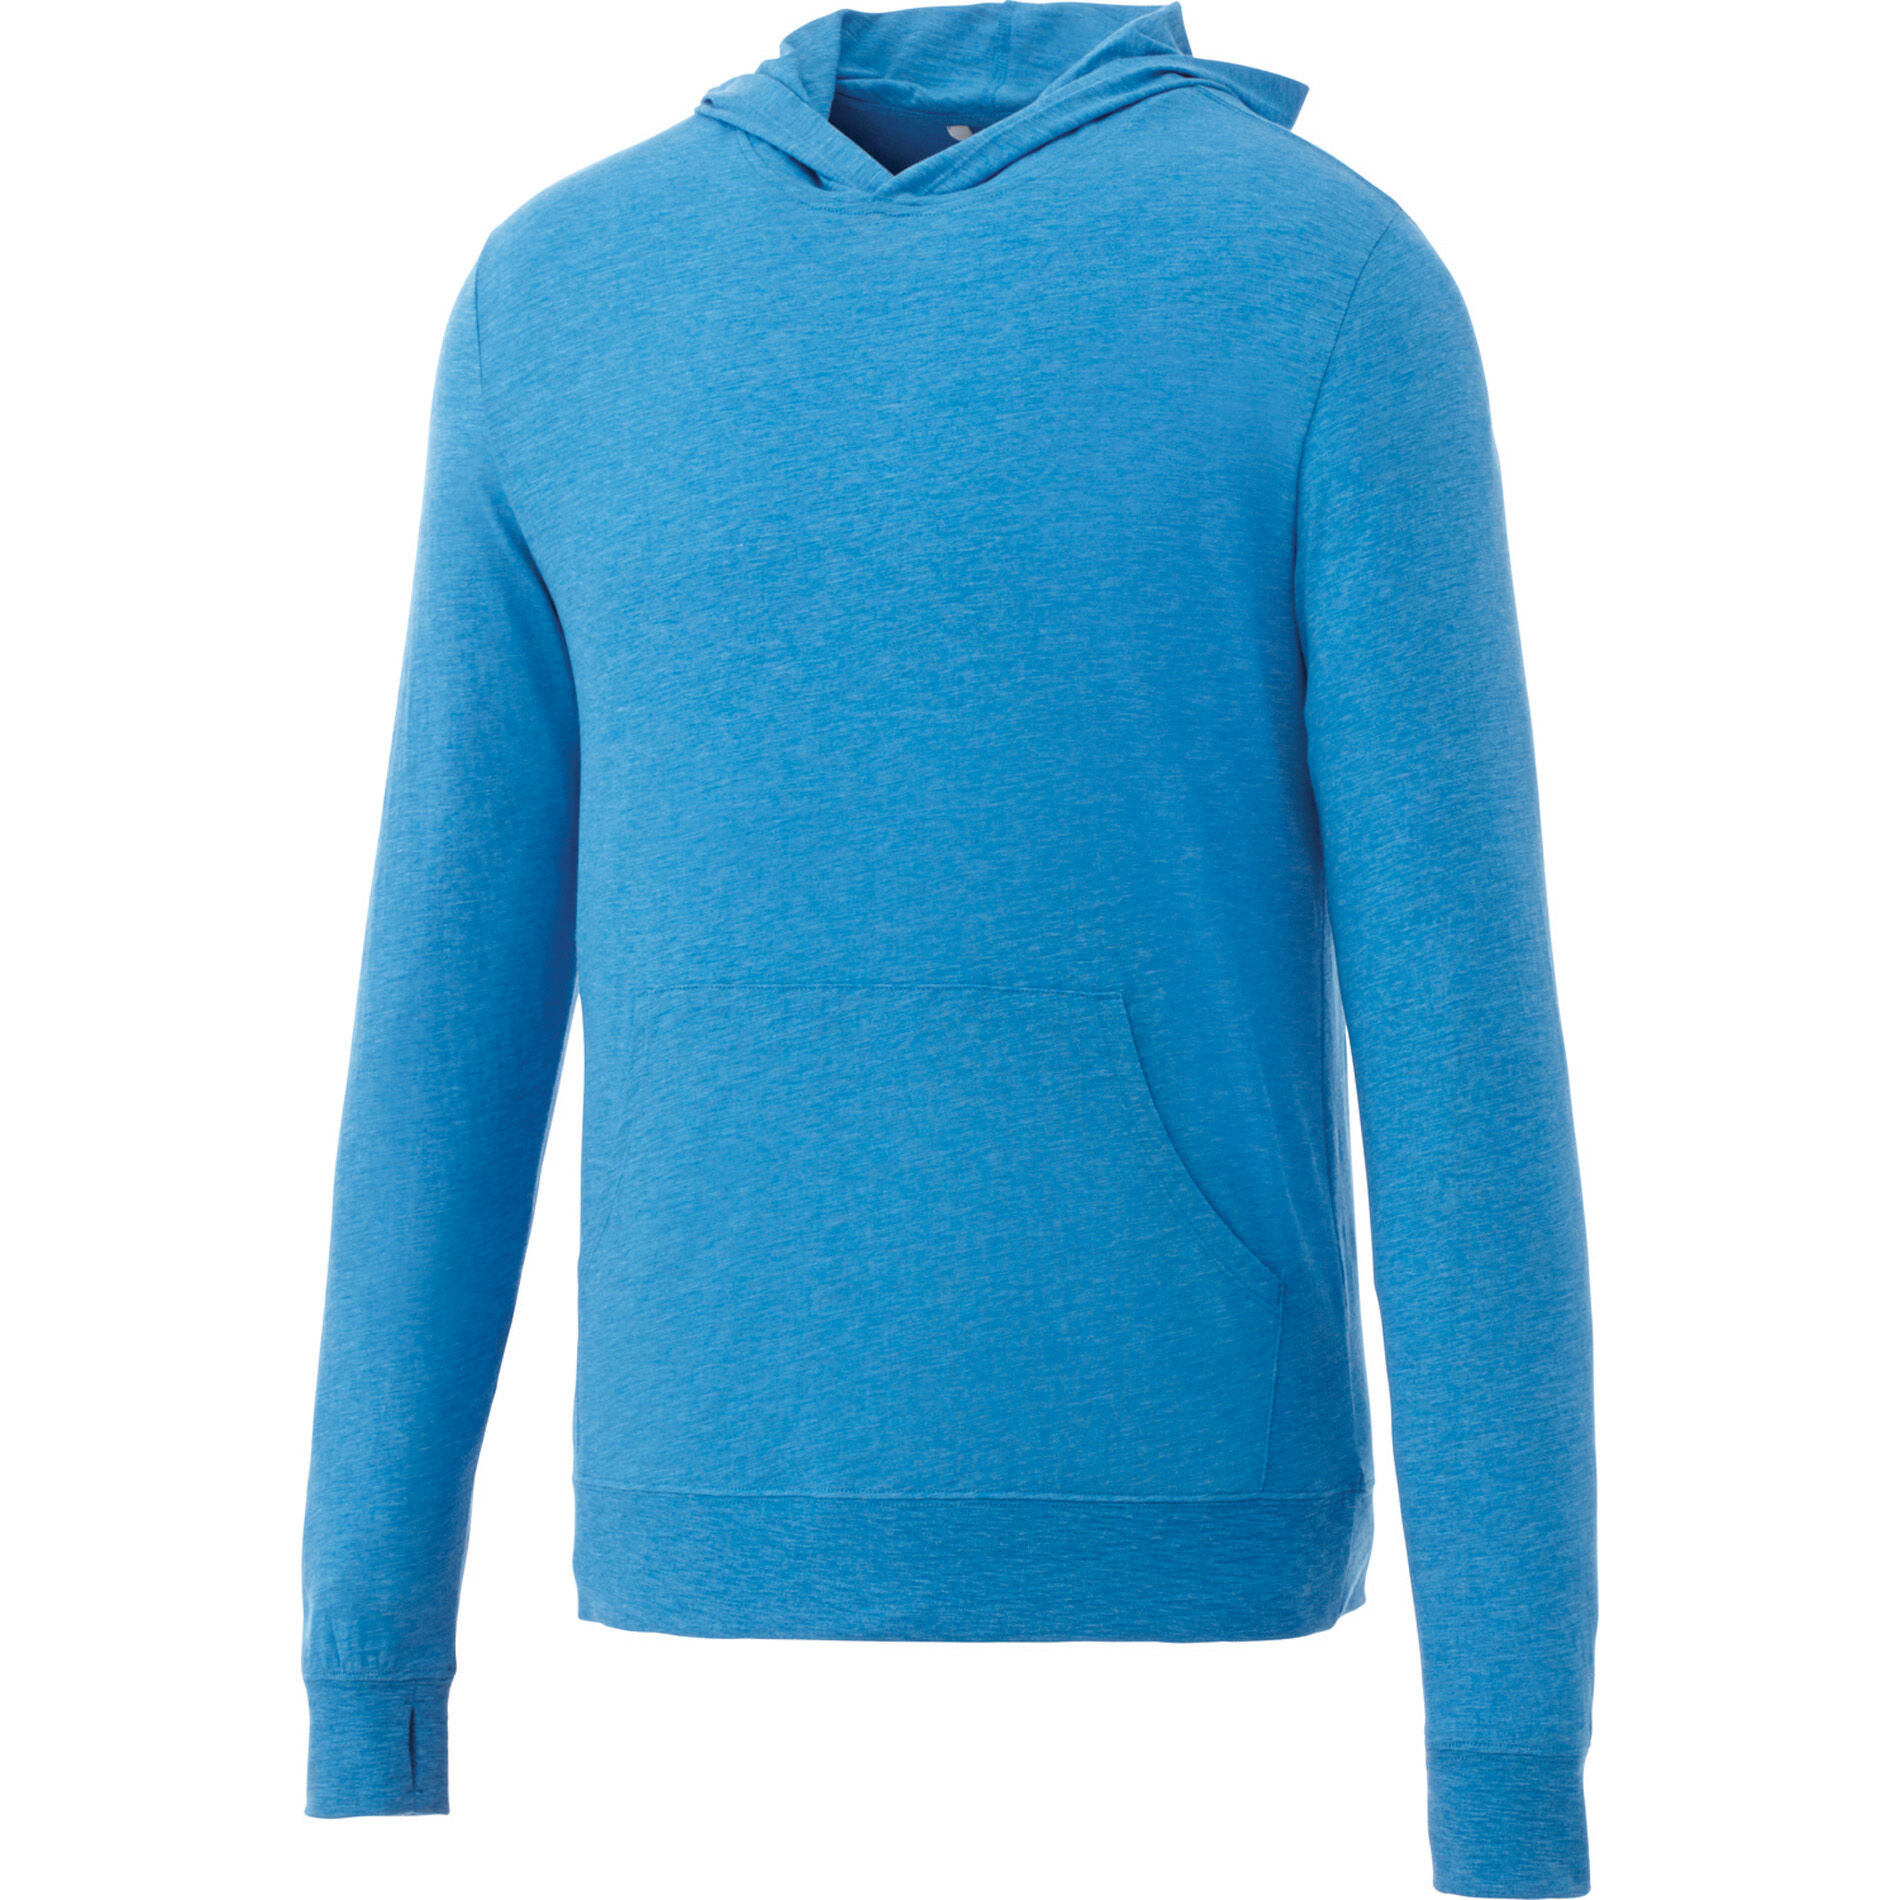 Custom Branded Howson Knit Hoody (Male) - Olympic Blue Heather